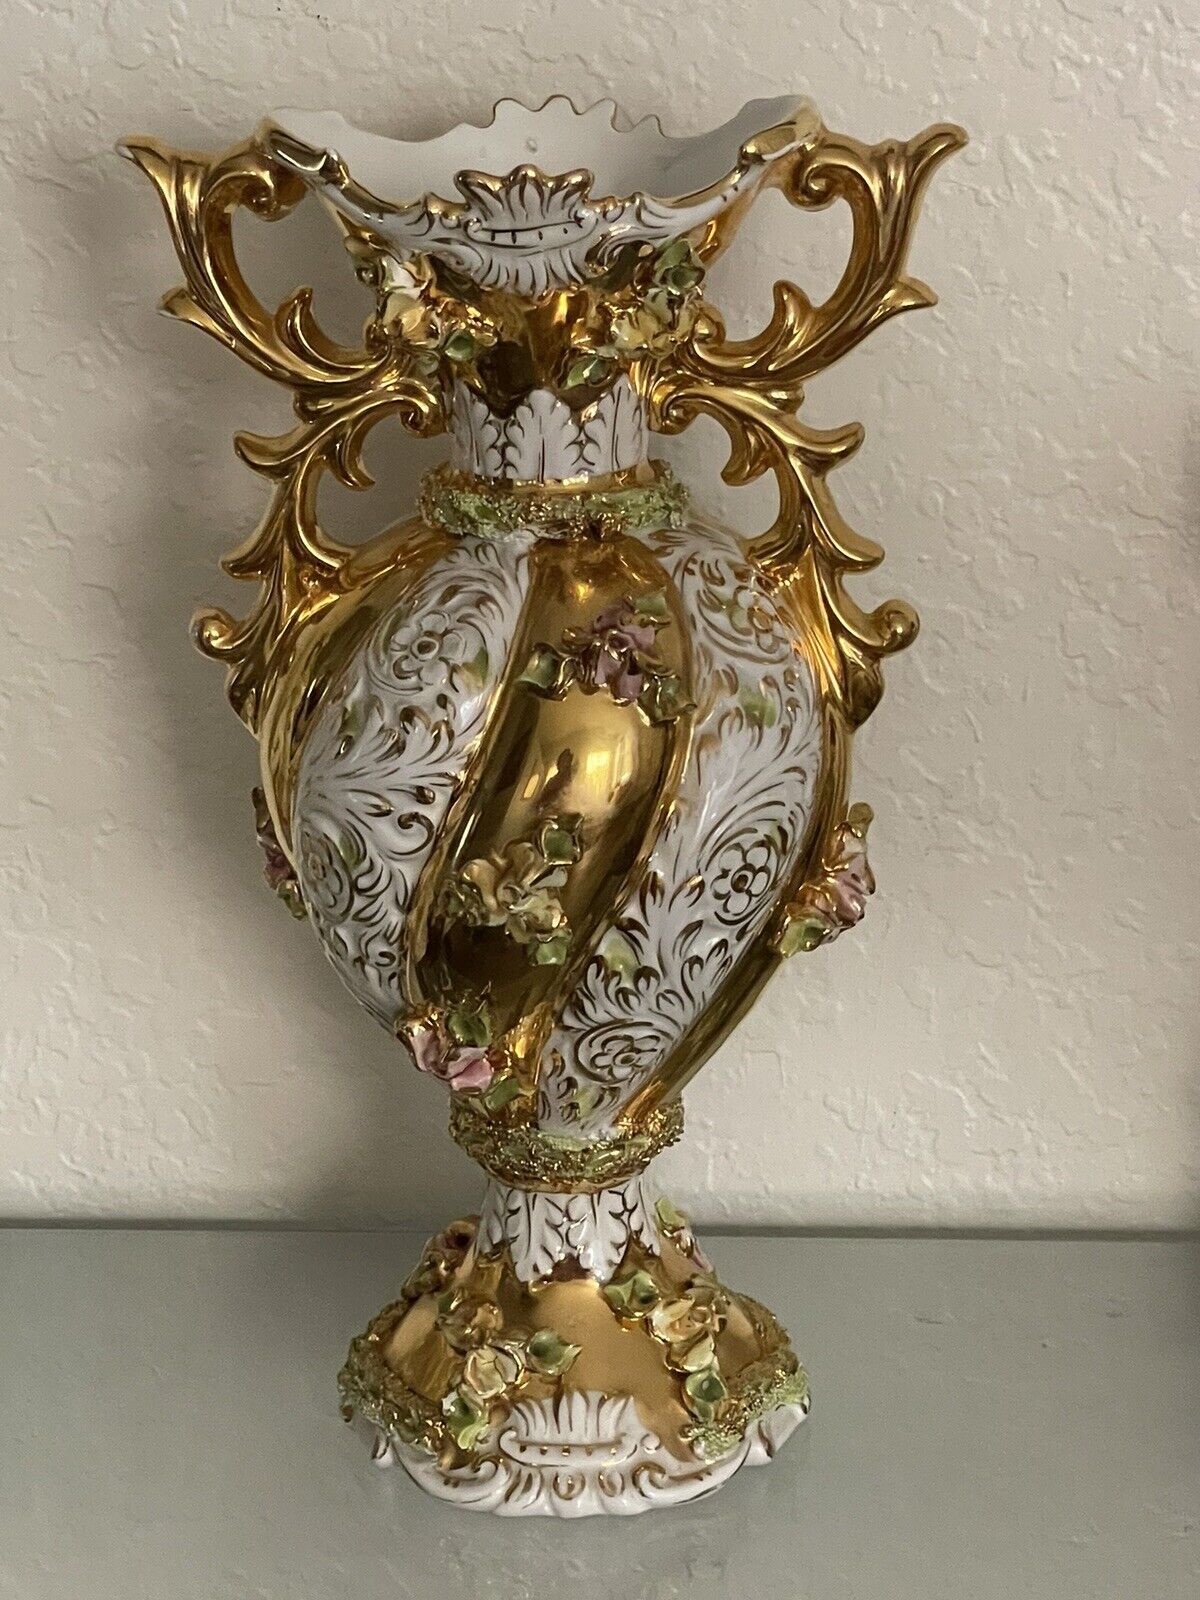 VTG Italian Rococo Two Handled Large Vase Gold/White Color Ceramic Made In Italy